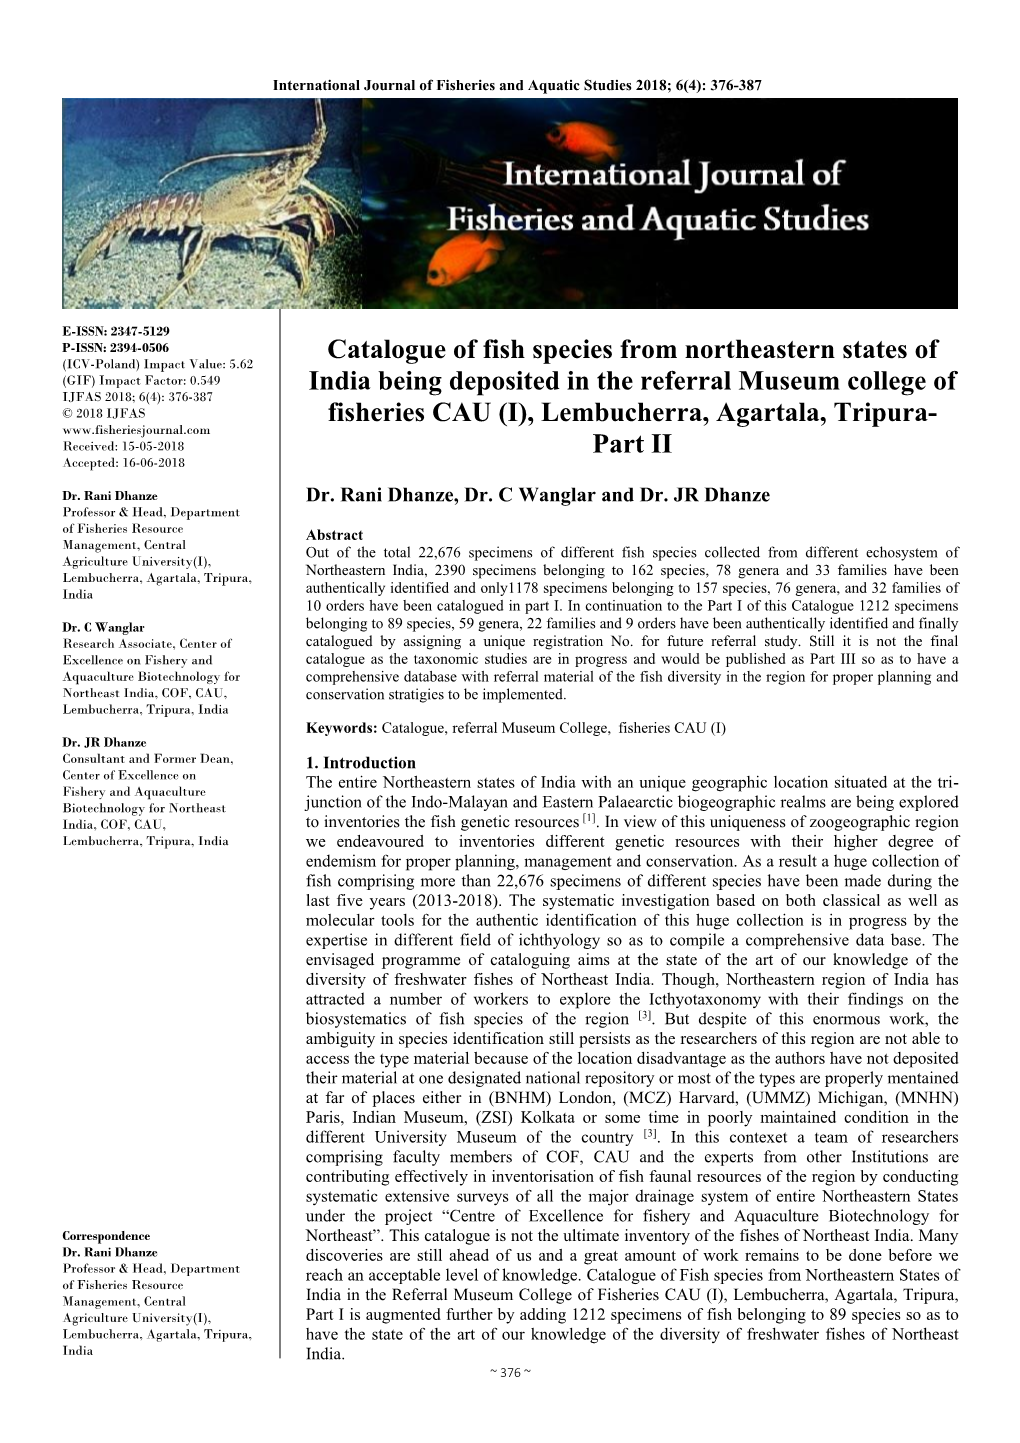 Catalogue of Fish Species from Northeastern States of India Being